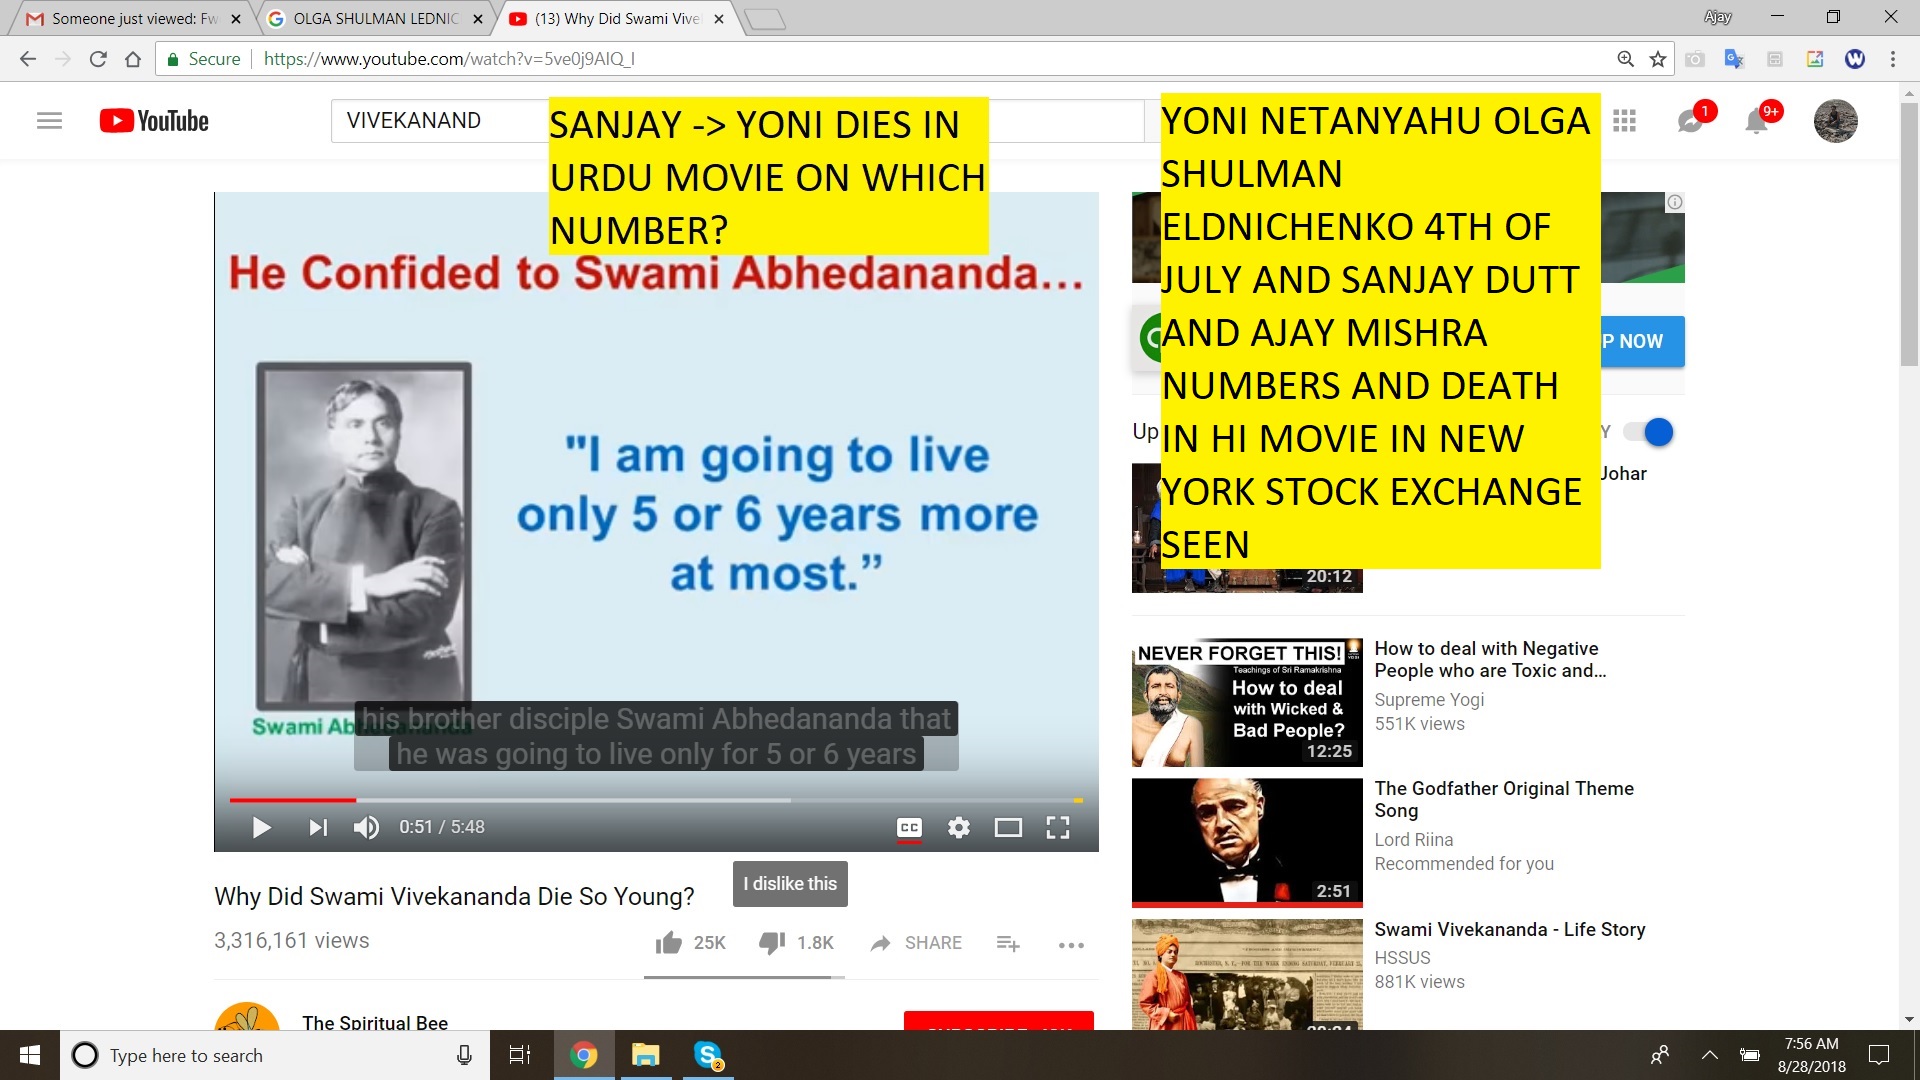 YONI NETANYAHU OLGA SHULMAN ELDNICHENKO 4TH OF JULY AND SANJAY DUTT AND AJAY MISHRA NUMBERS AND DEATH IN HI MOVIE IN NEW YORK STOCK EXCHANGE SEEN